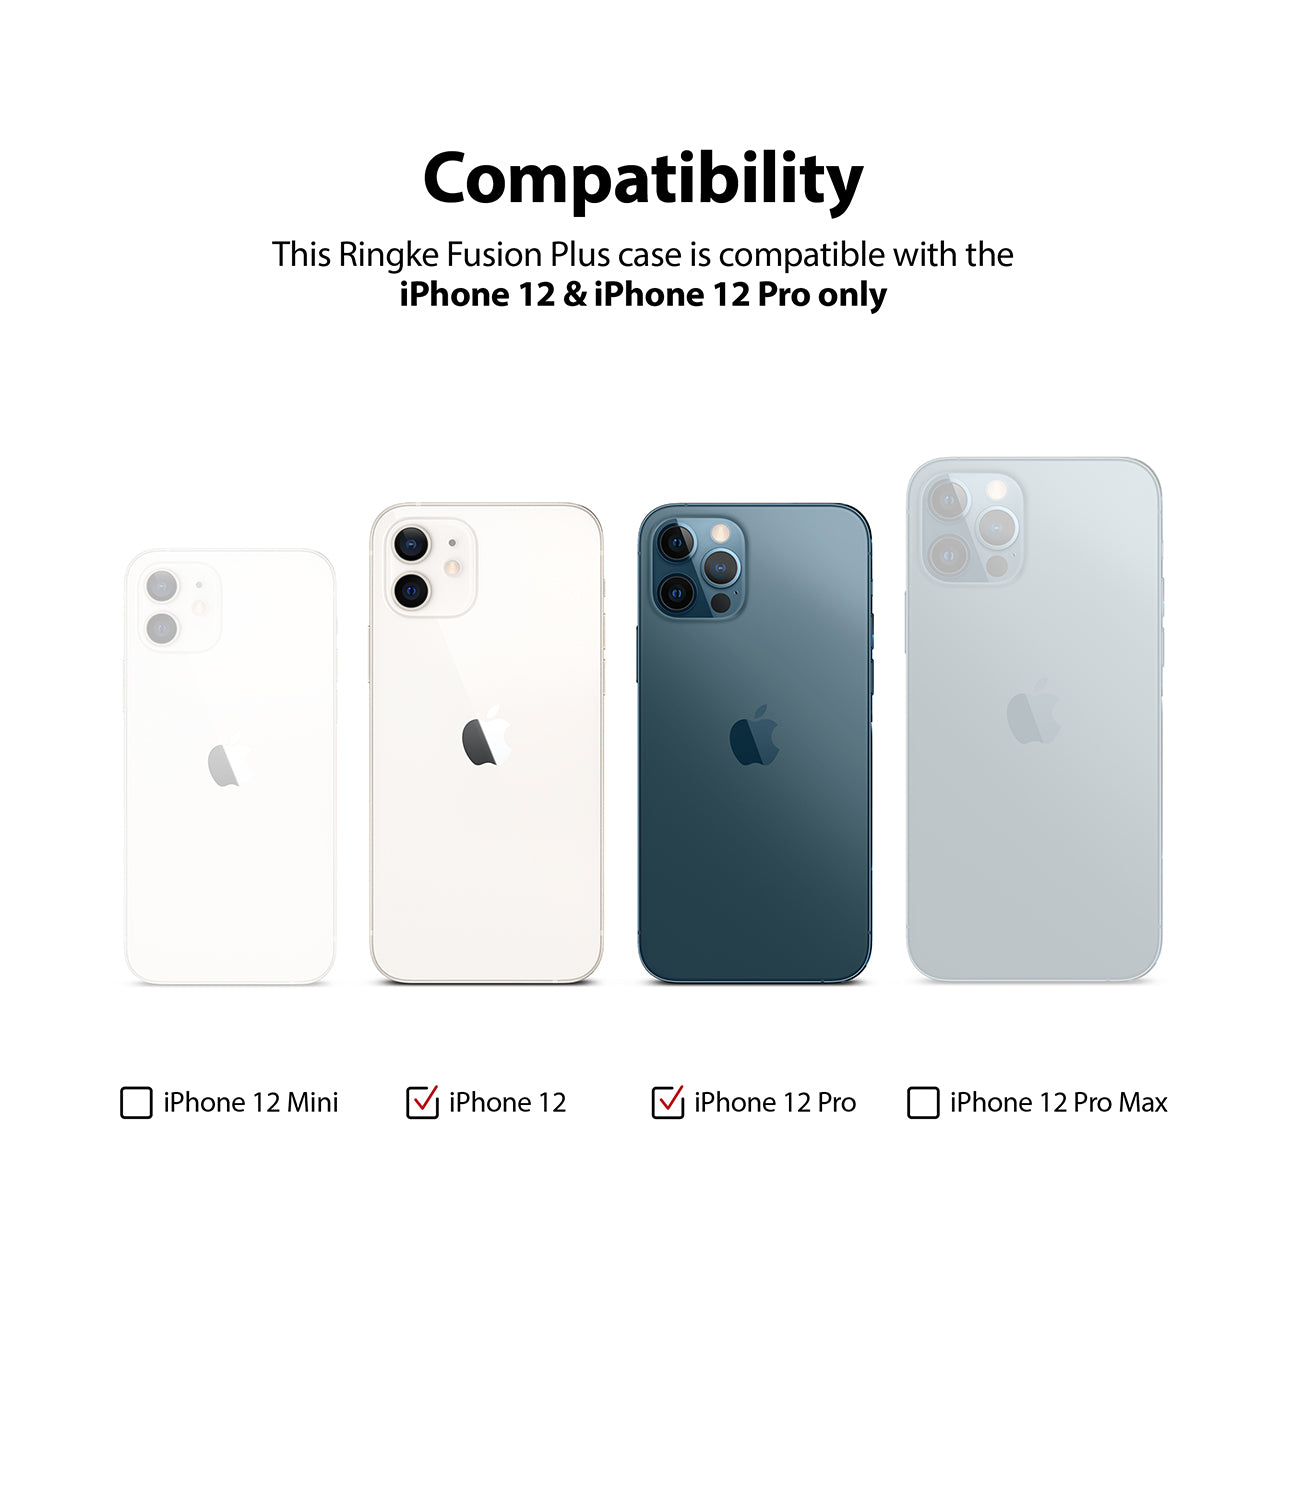 compatible with iphone 12, iphone 12 pro